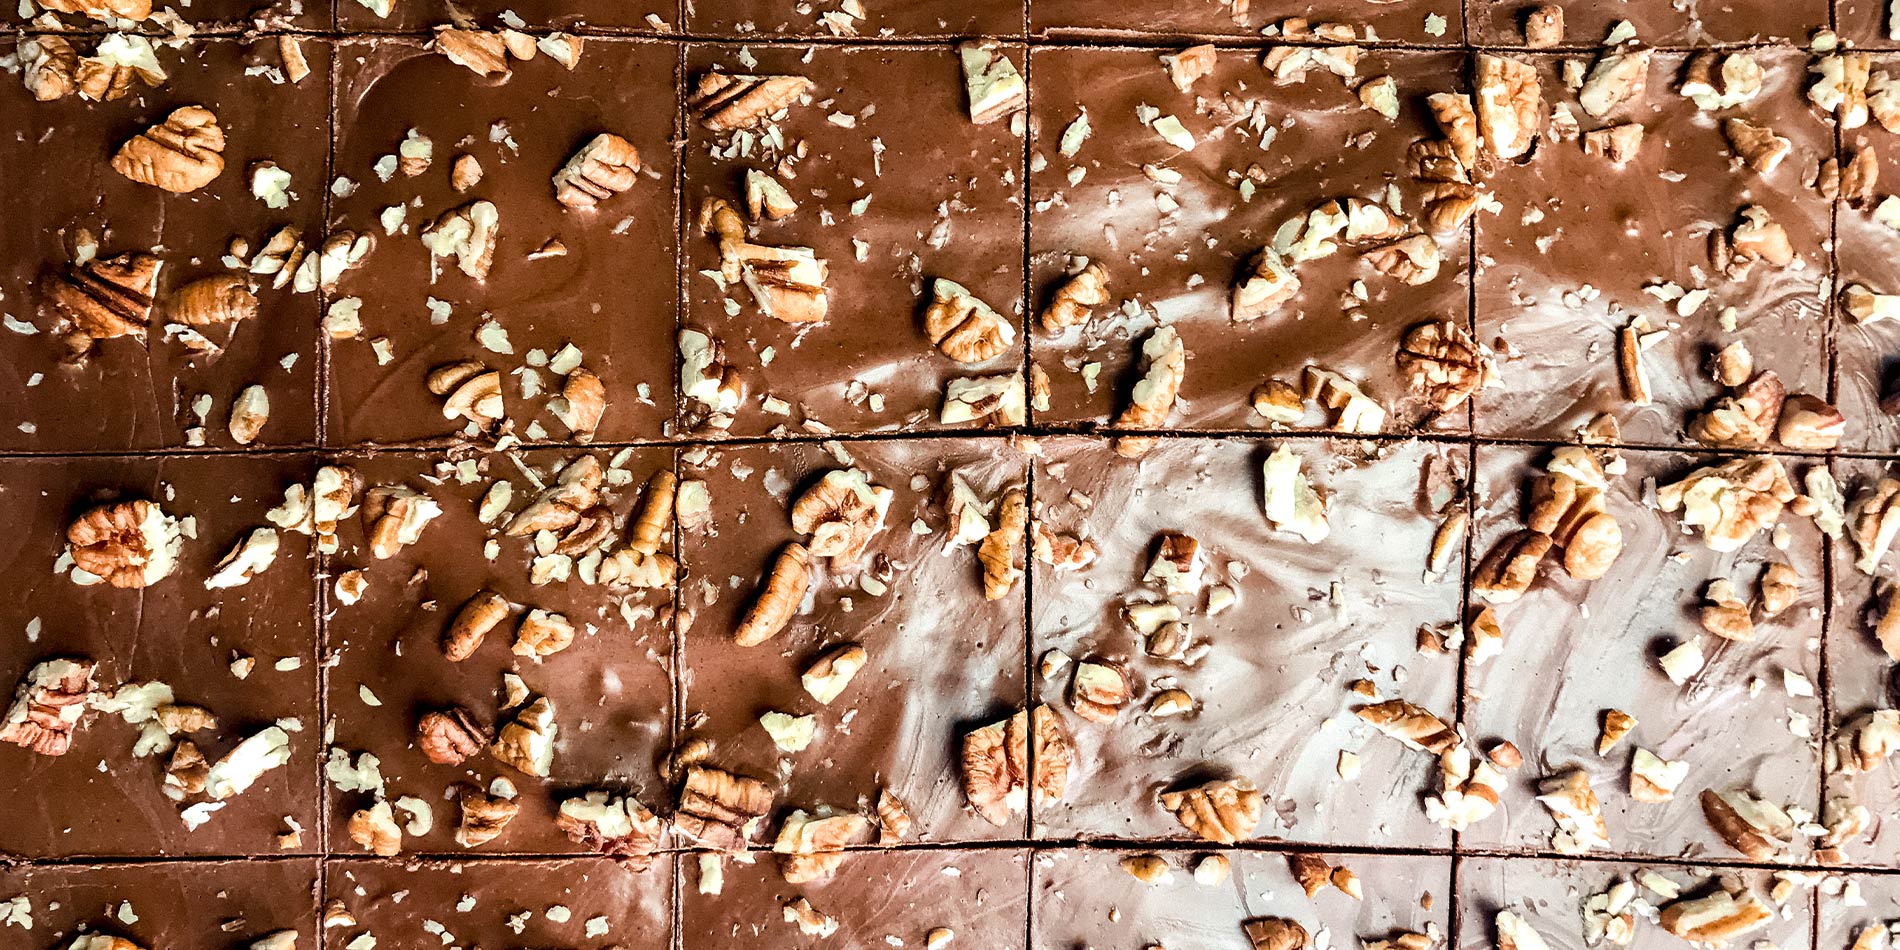 Raw Chocolate Hazelnut Superfood Fudge Brownies cut into 24 square pieces to fit entirely into the picture dimensions